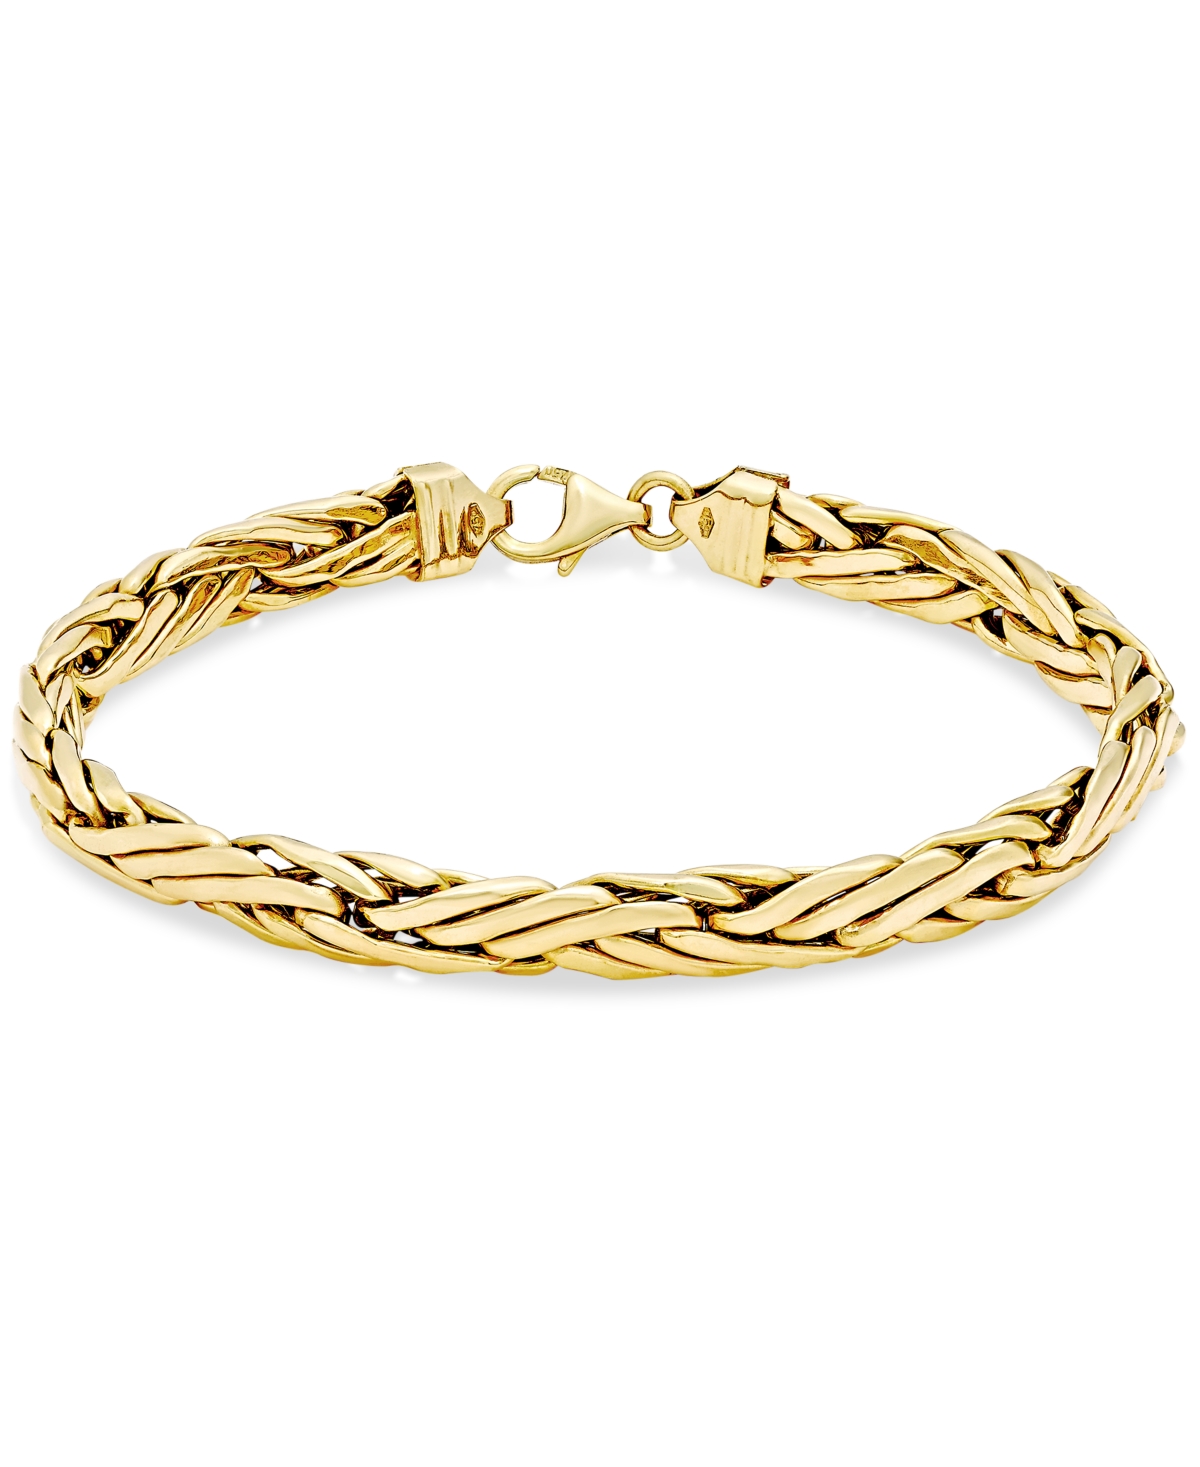 Woven Link Chain Bracelet in 14k Gold - Yellow Gold